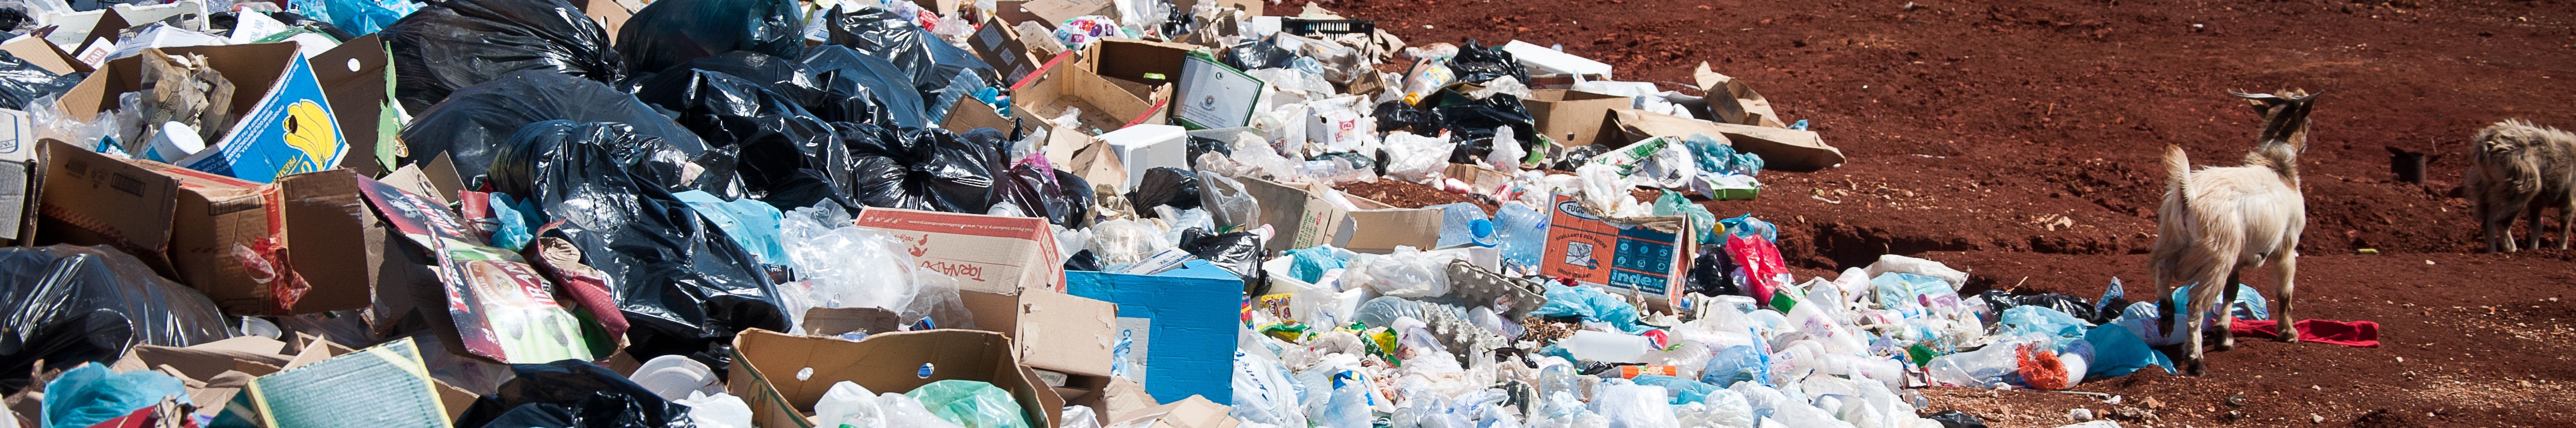 In 2021/2022, DS Smith generated 1,510,728 t of waste, of which 63% was recycled